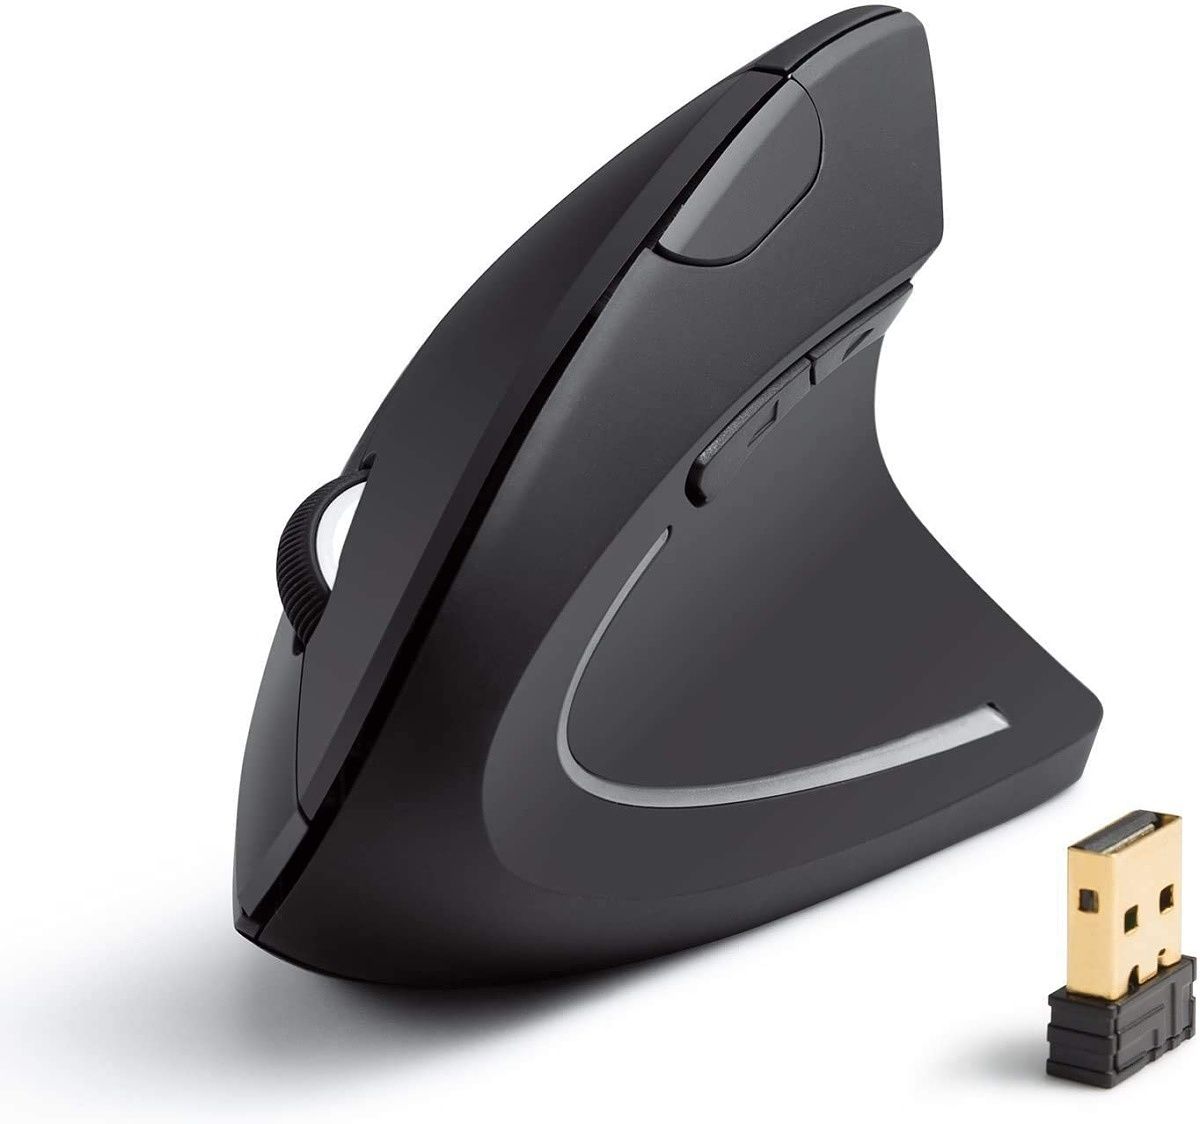 Another popular form factor is the vertical mouse design. Many users find this to be the most comfortable way to use a mouse for long periods of time since it lets your wrist rest more naturally.